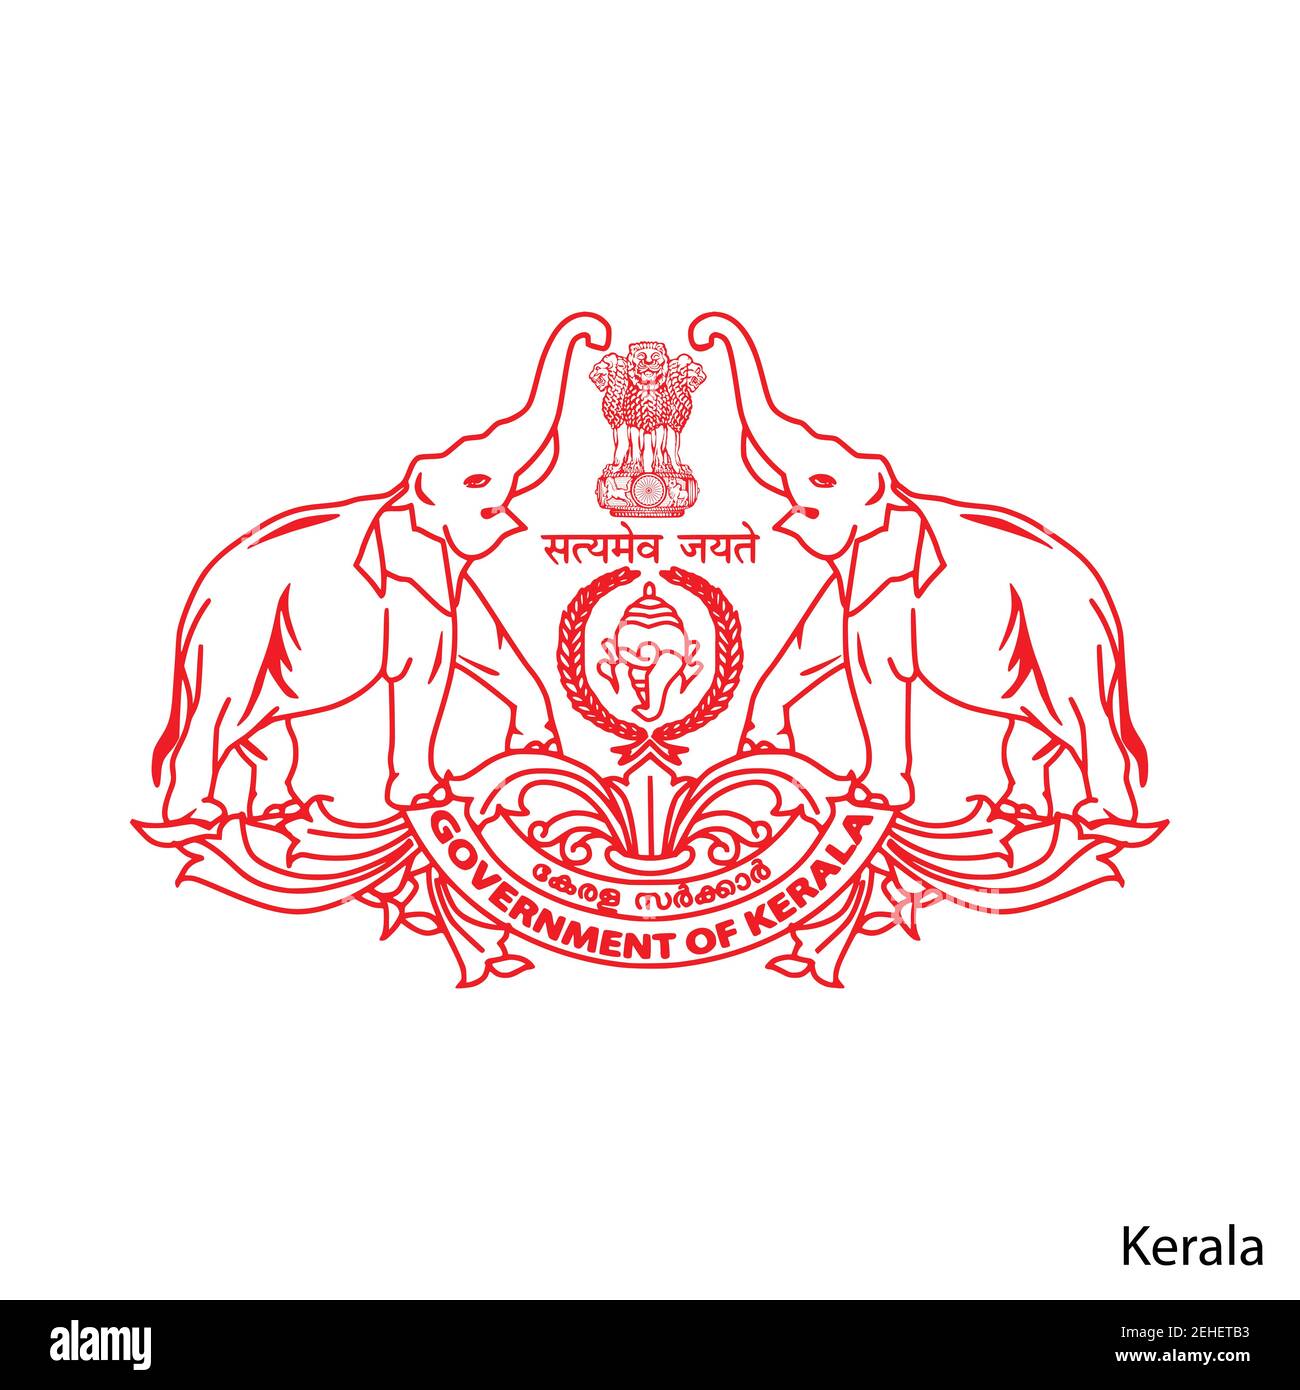 Kerala State Road Transportation Corporation Recruitment 2022: Salary  150000 Per Month, Check Posts, Salary & Other Important Details Here